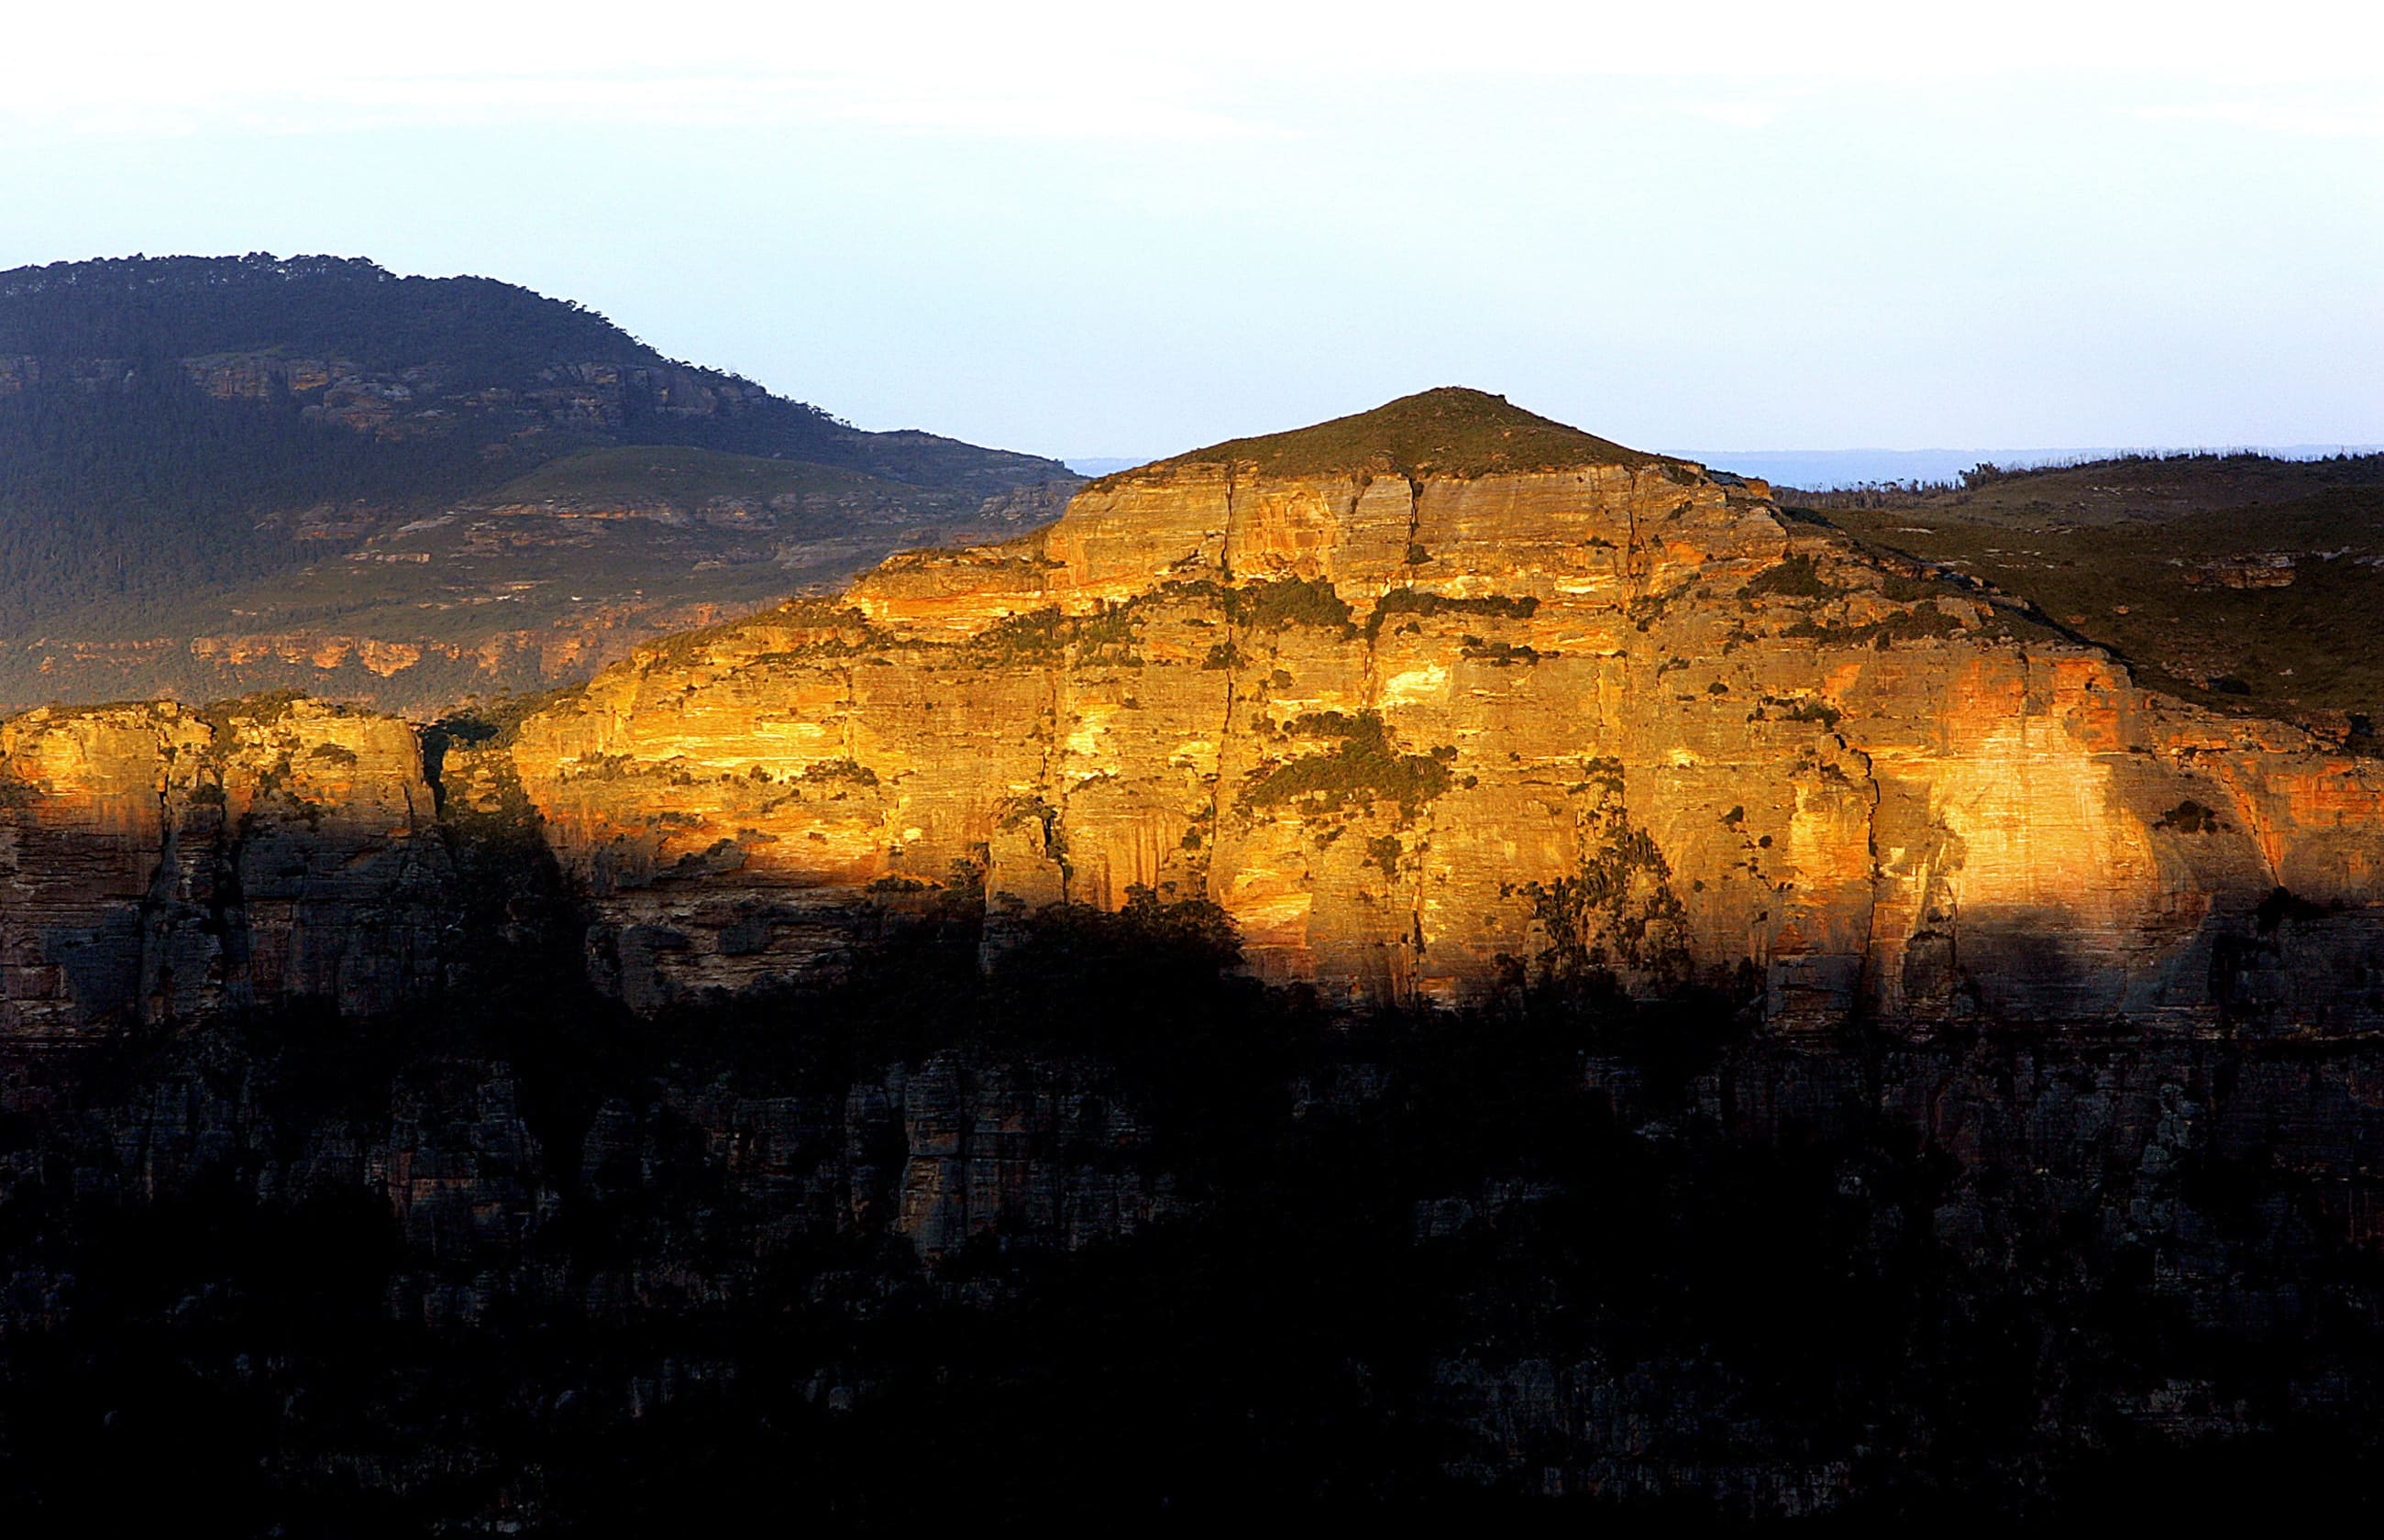 The sun sets across a mountain top in the Blue Mountains National Park, inland from central Sydney.